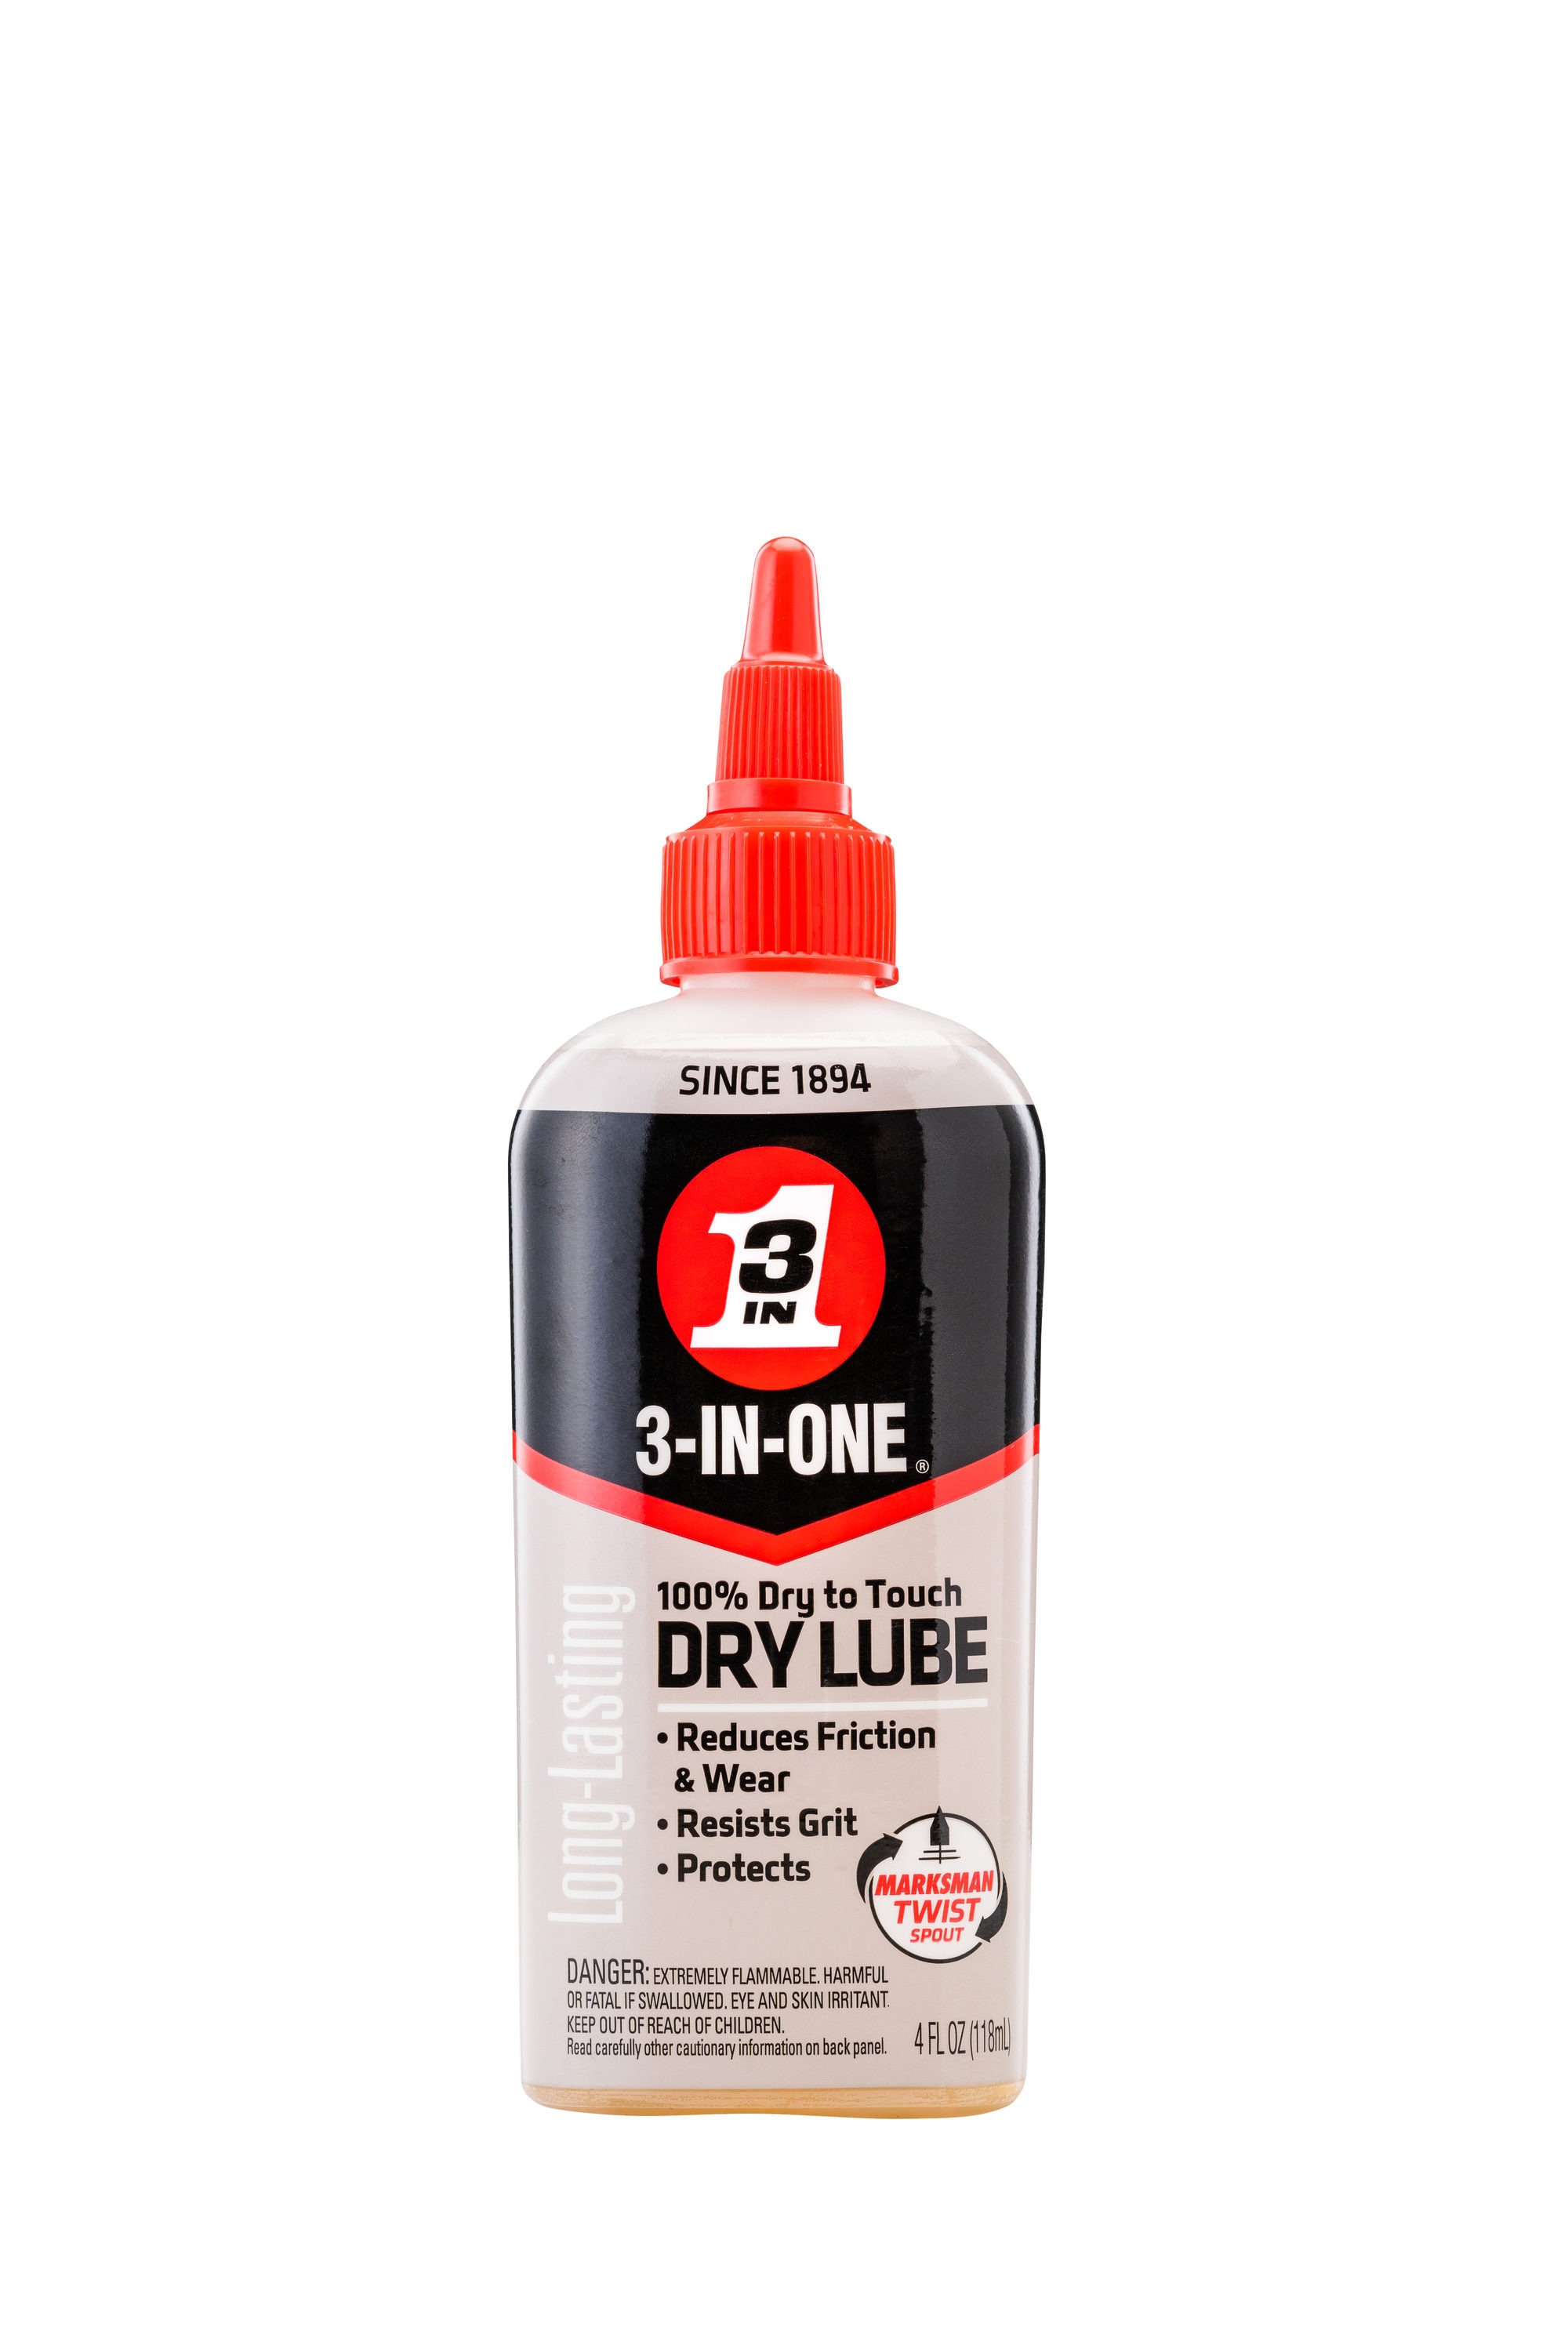 Reviews for 3-IN-ONE 3 oz. Multi-Purpose Oil, Long-Lasting Lubricant